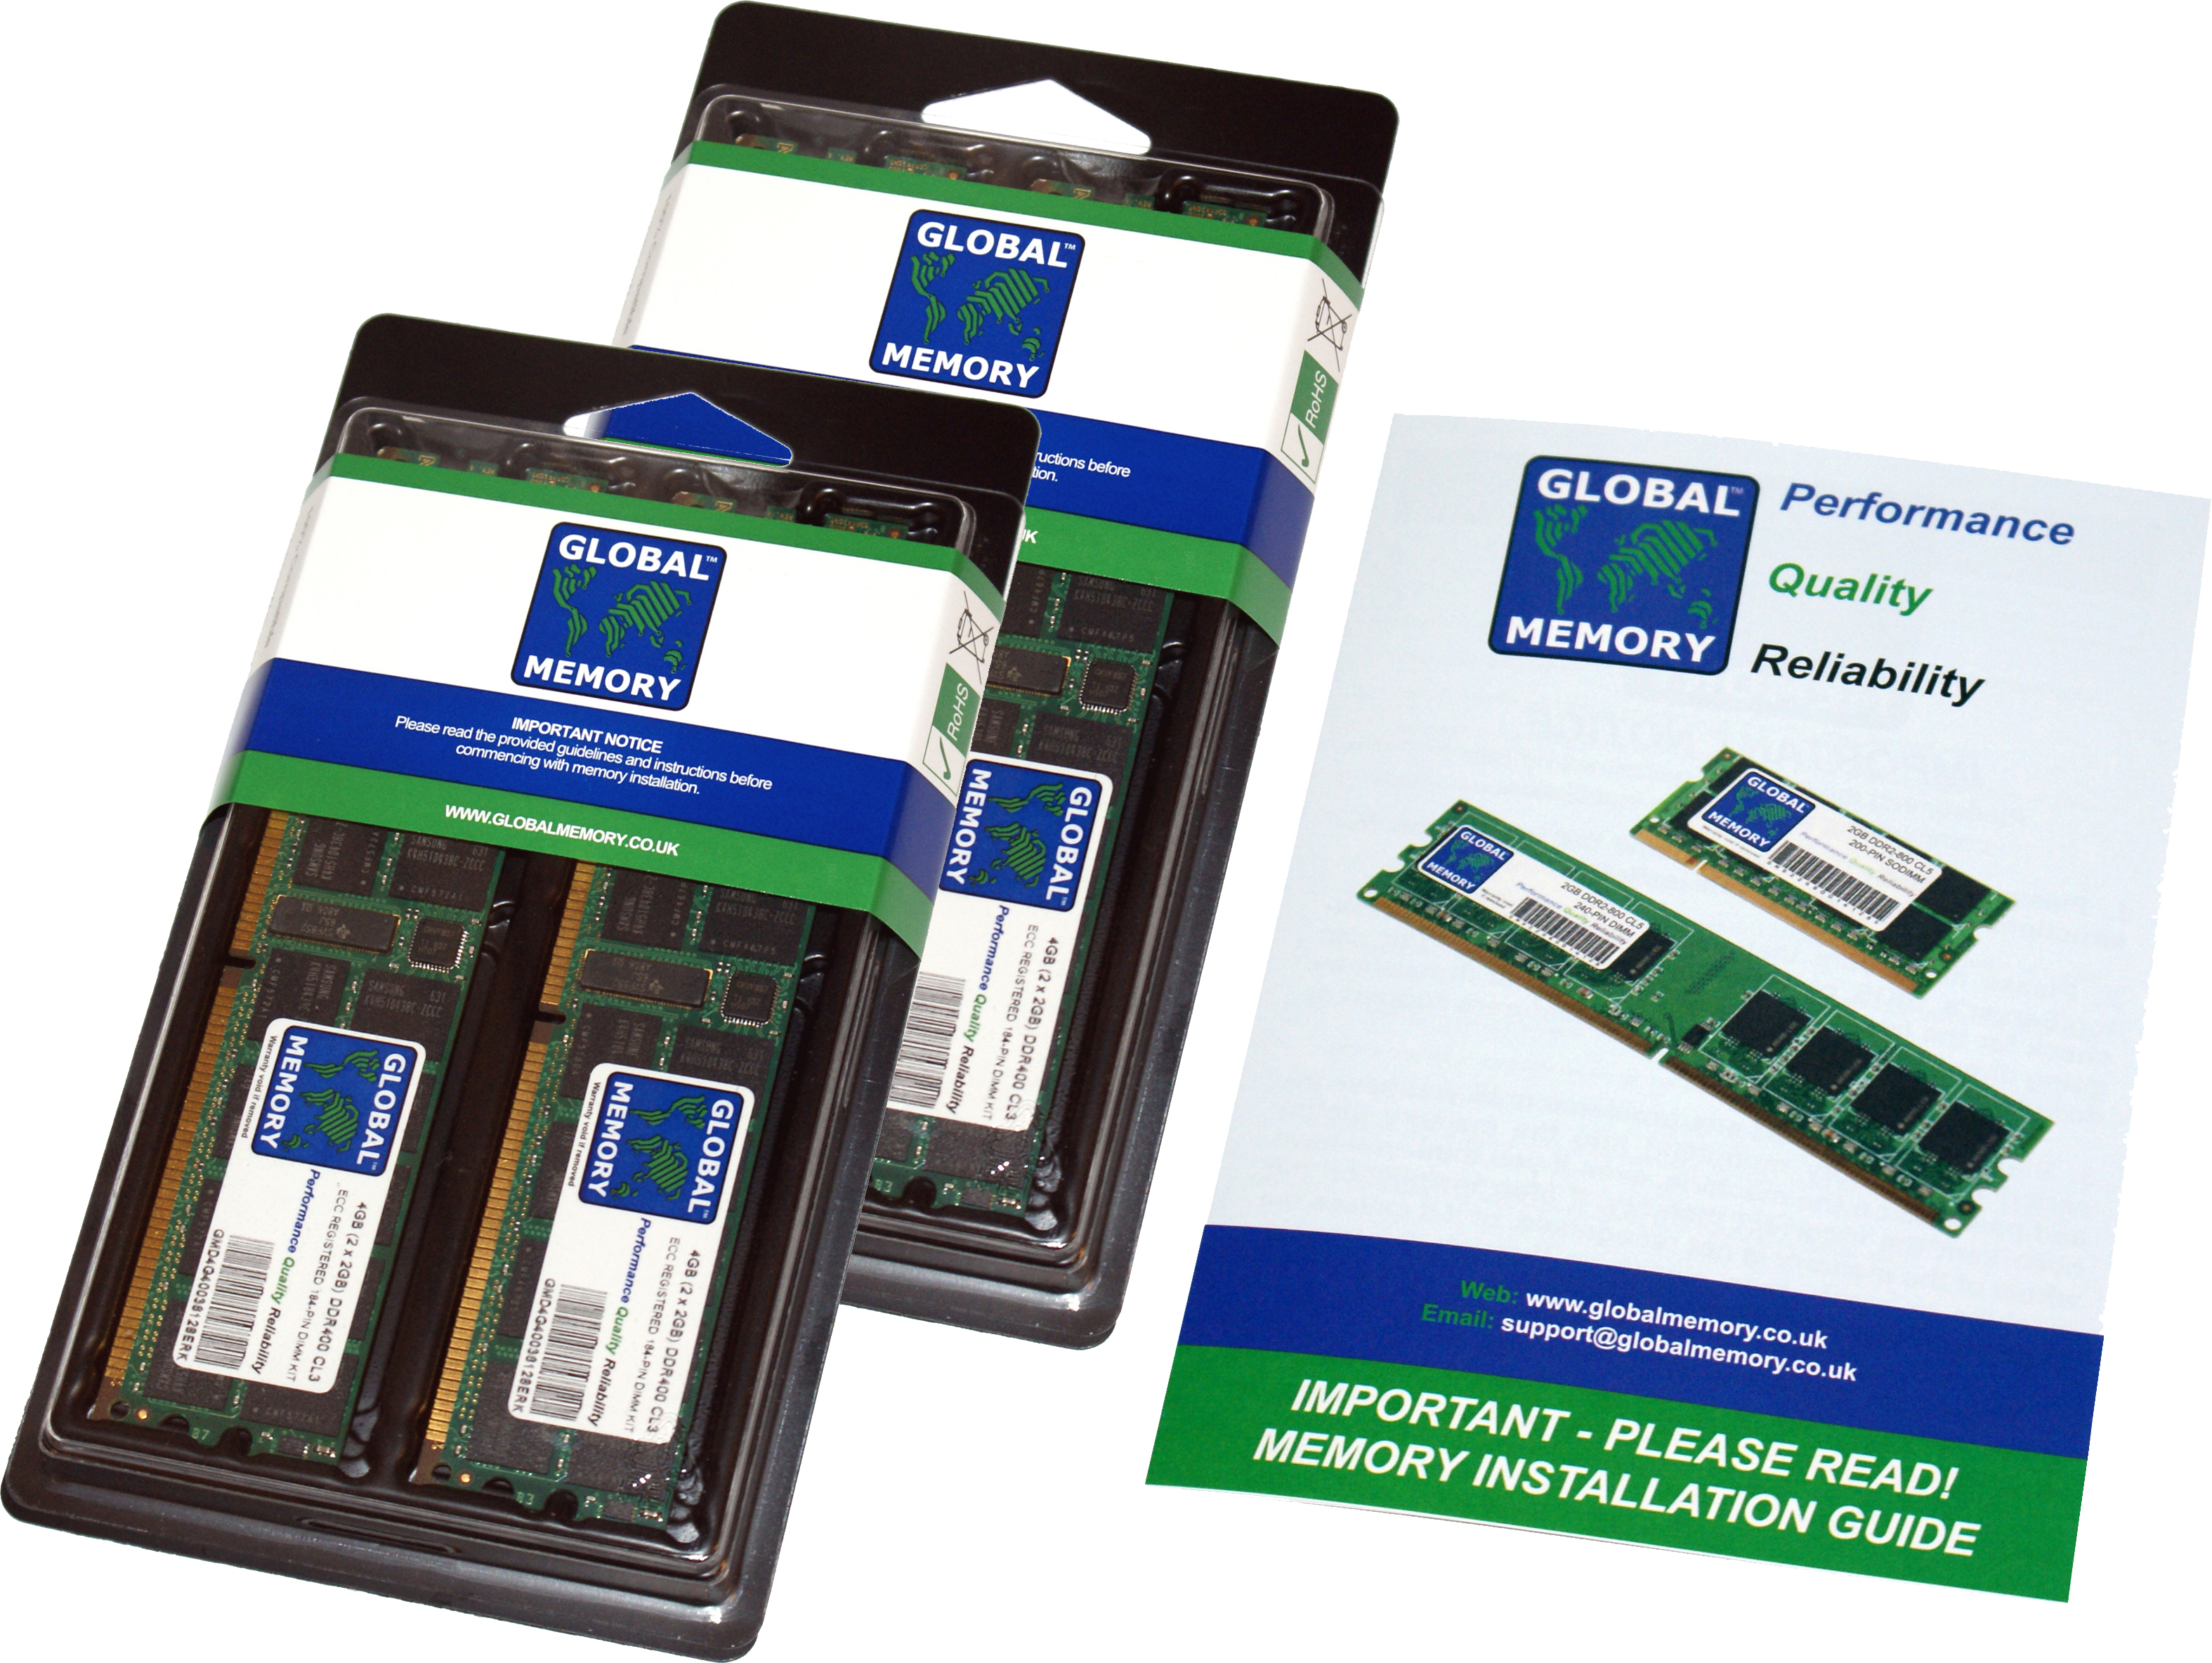 256GB (4 x 64GB) DDR4 2666MHz PC4-21300 288-PIN LOAD REDUCED ECC REGISTERED DIMM (LRDIMM) MEMORY RAM KIT FOR ACER SERVERS/WORKSTATIONS/MOTHERBOARDS (16 RANK KIT CHIPKILL)